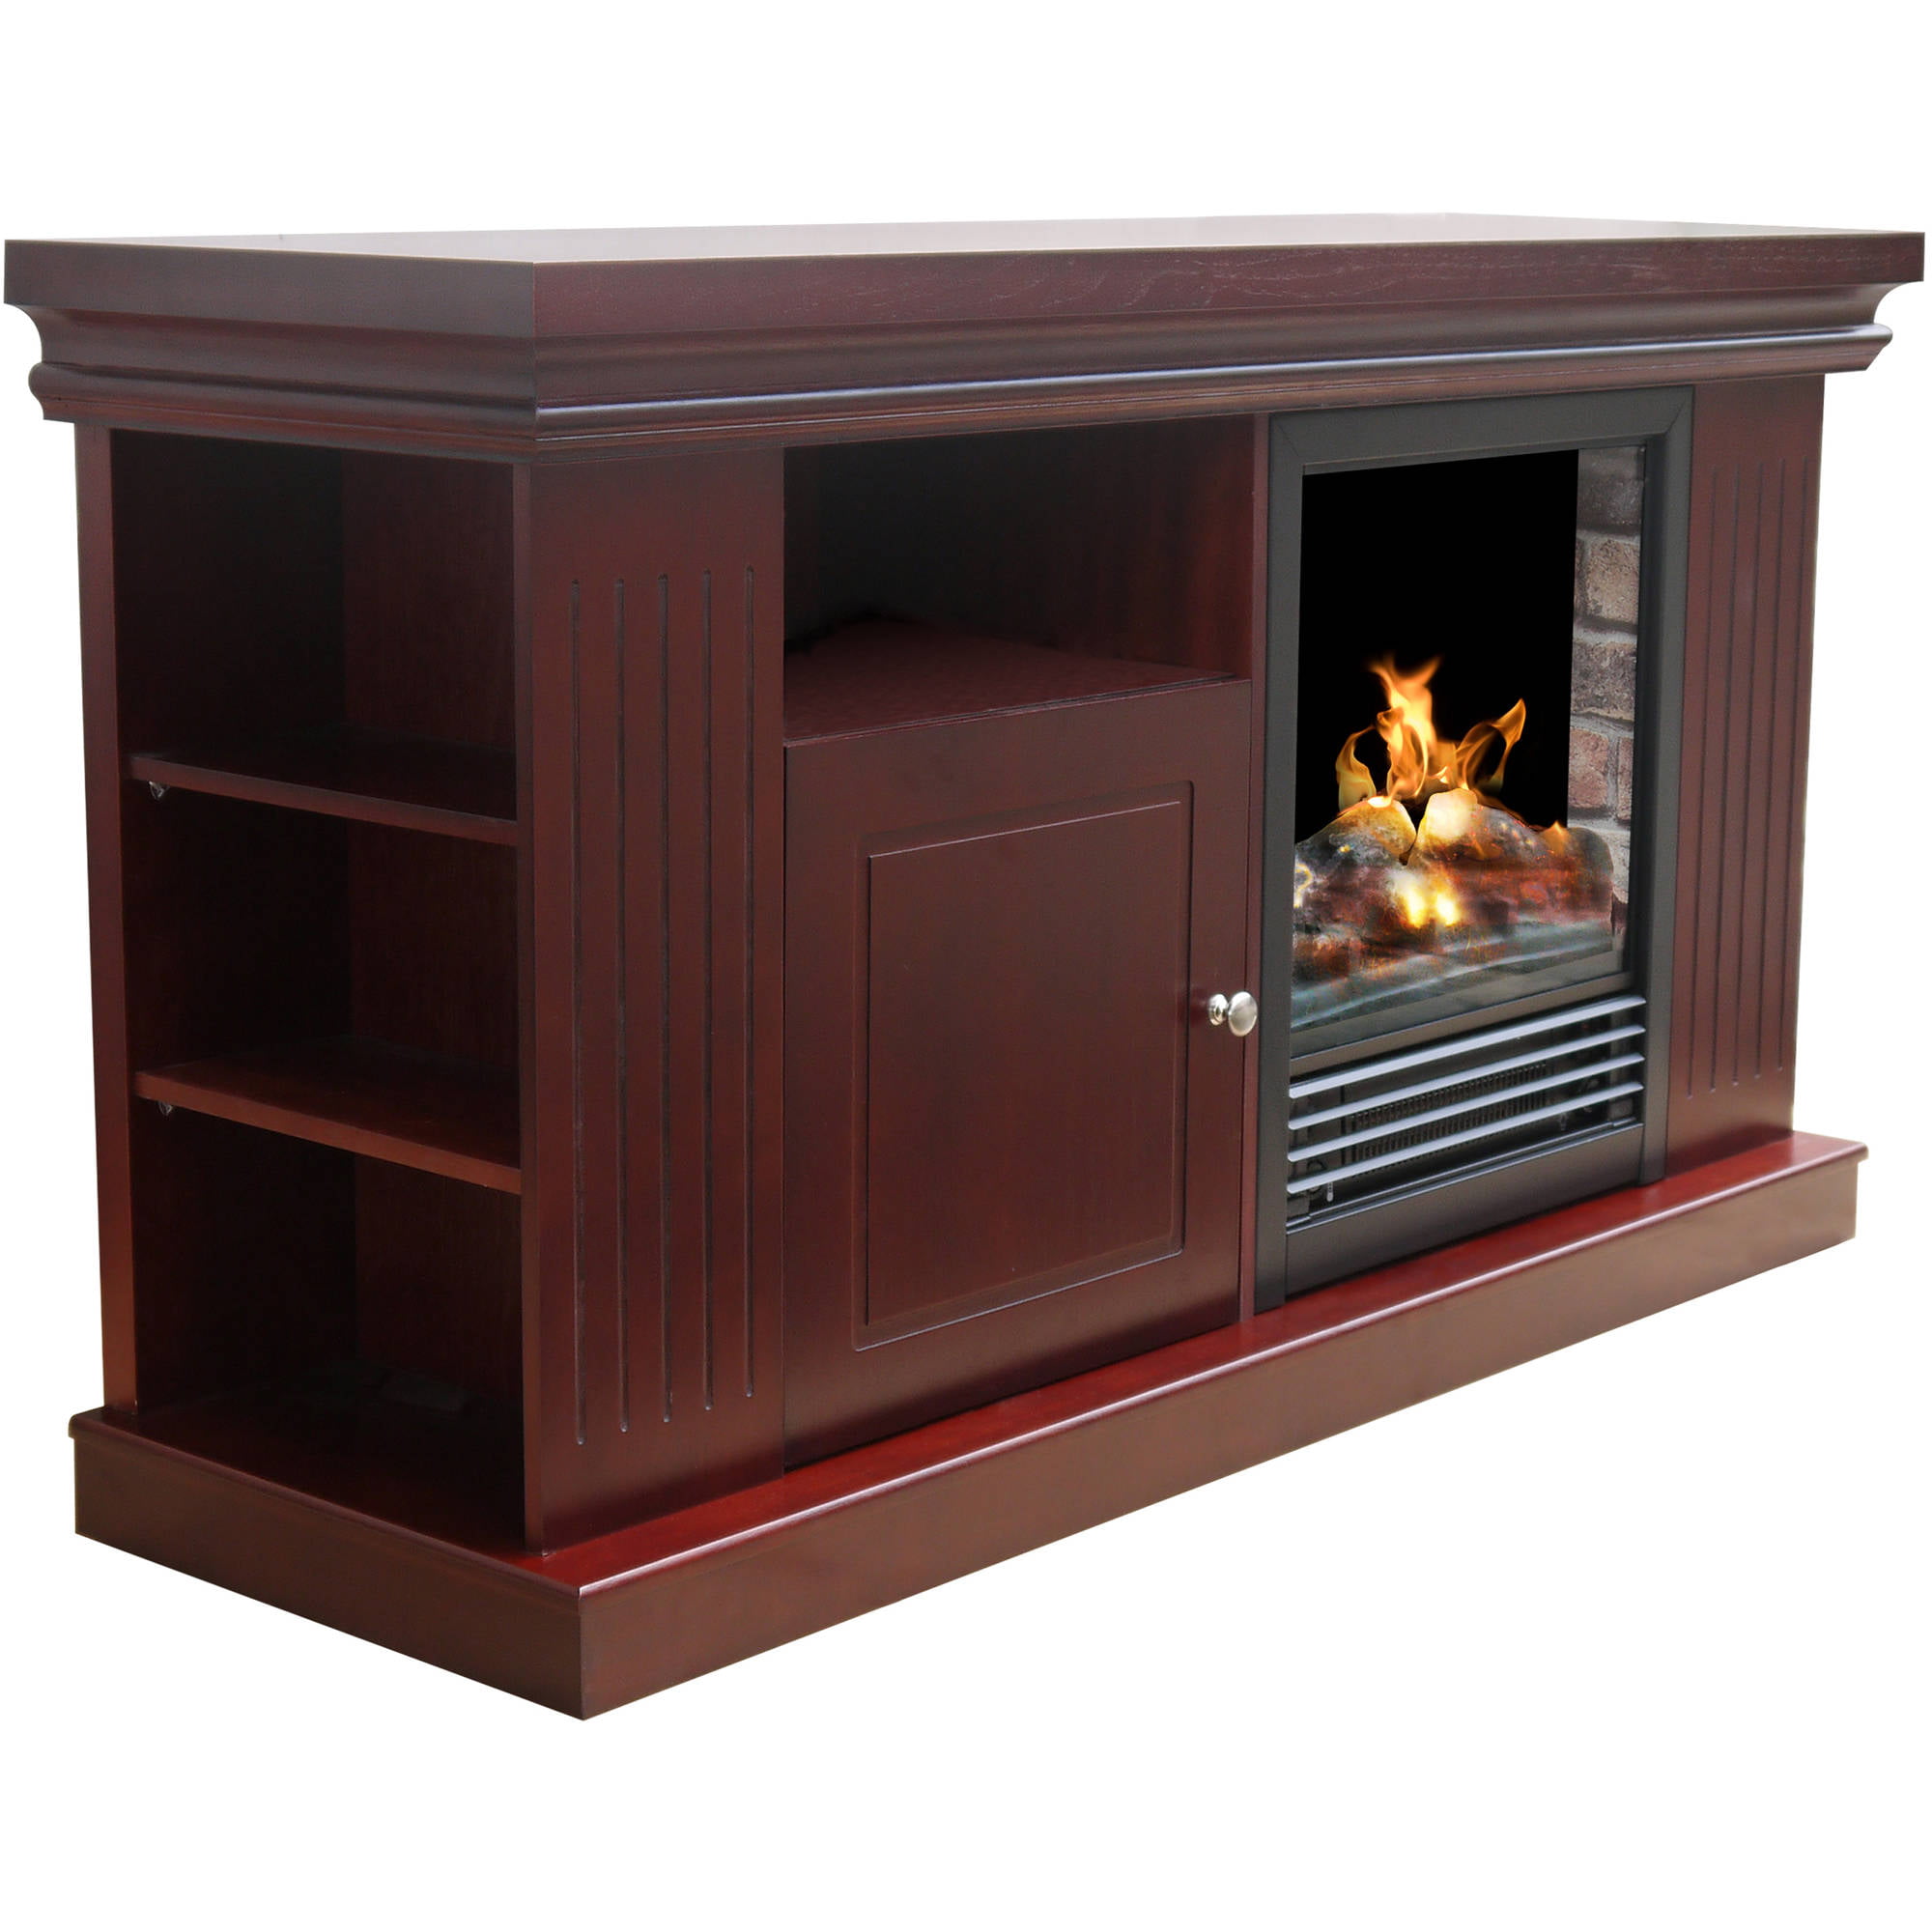 48 Inch TV Stand With Fireplace Media Console Electric Entertainment Center SALE  eBay